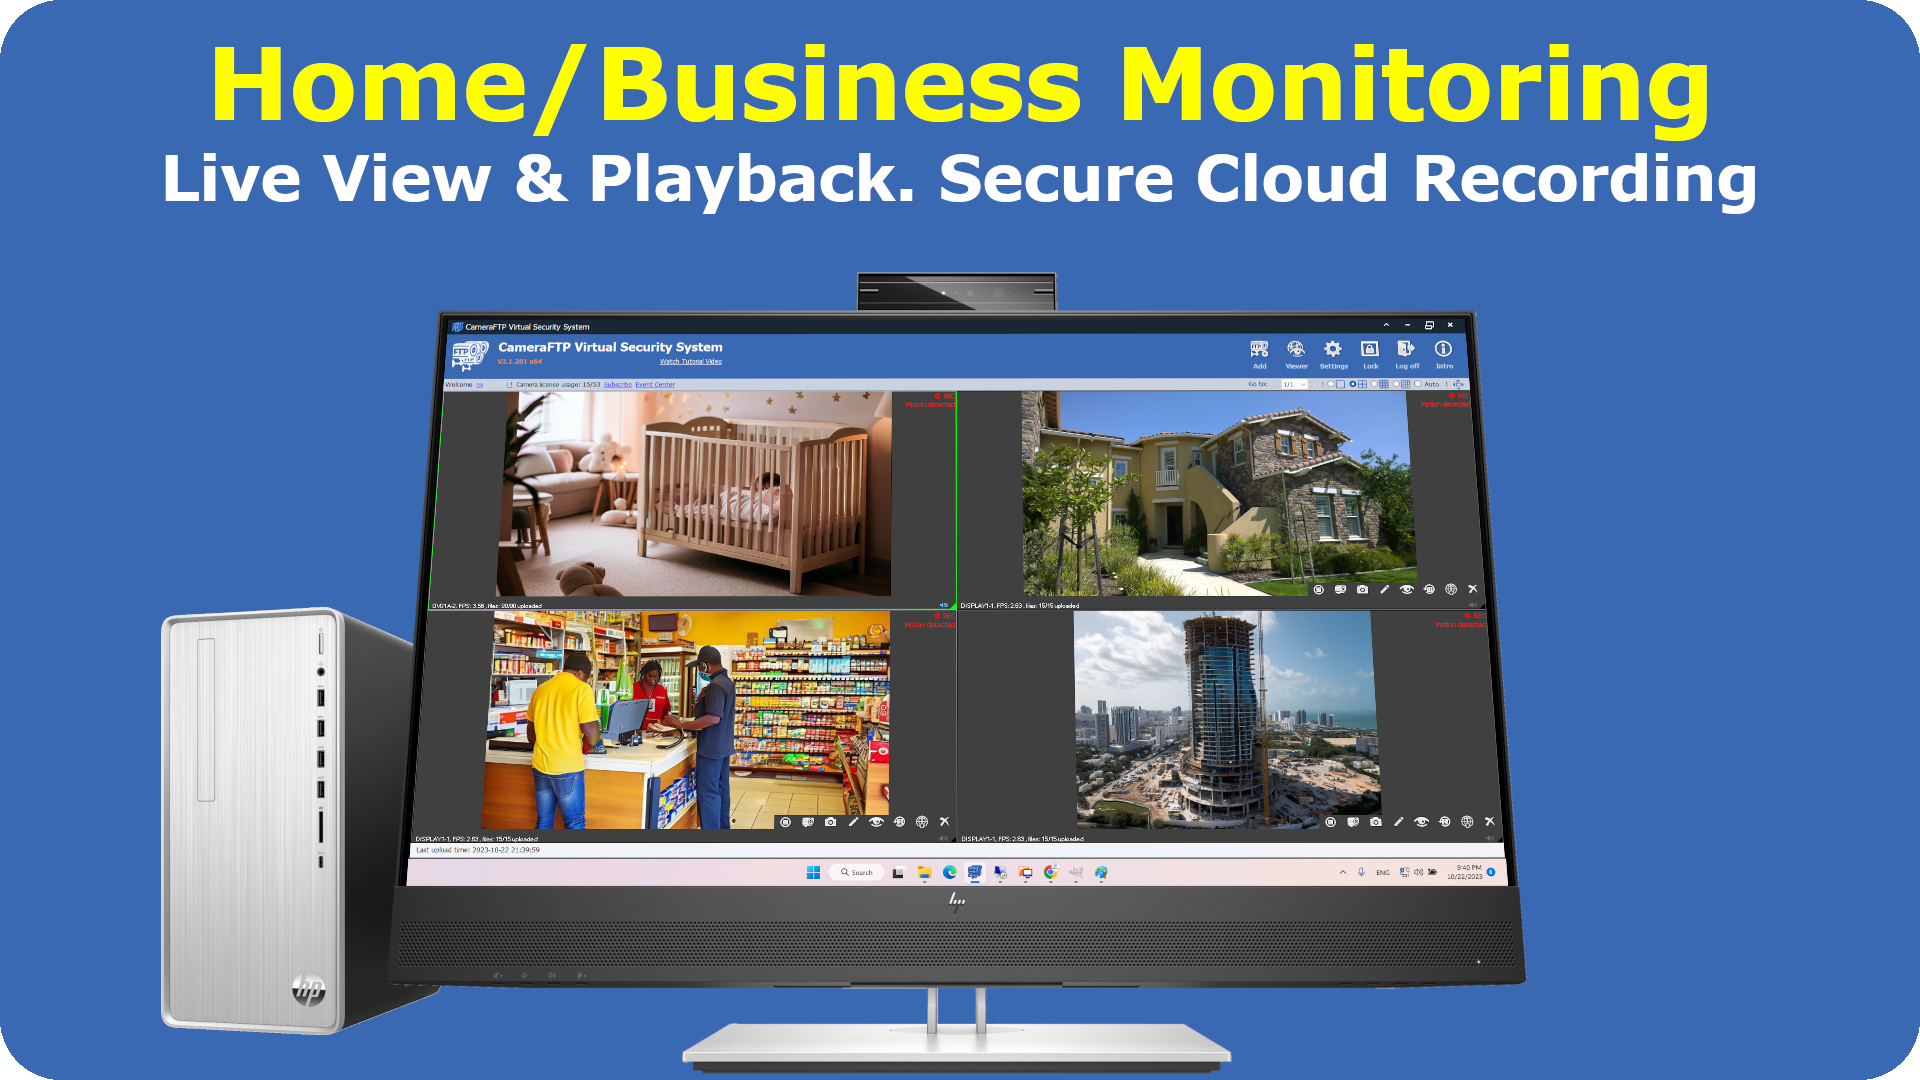 Home / Business Monitoring with CameraFTP VSS software. Secure cloud storage; Live view & Playback from anywhere